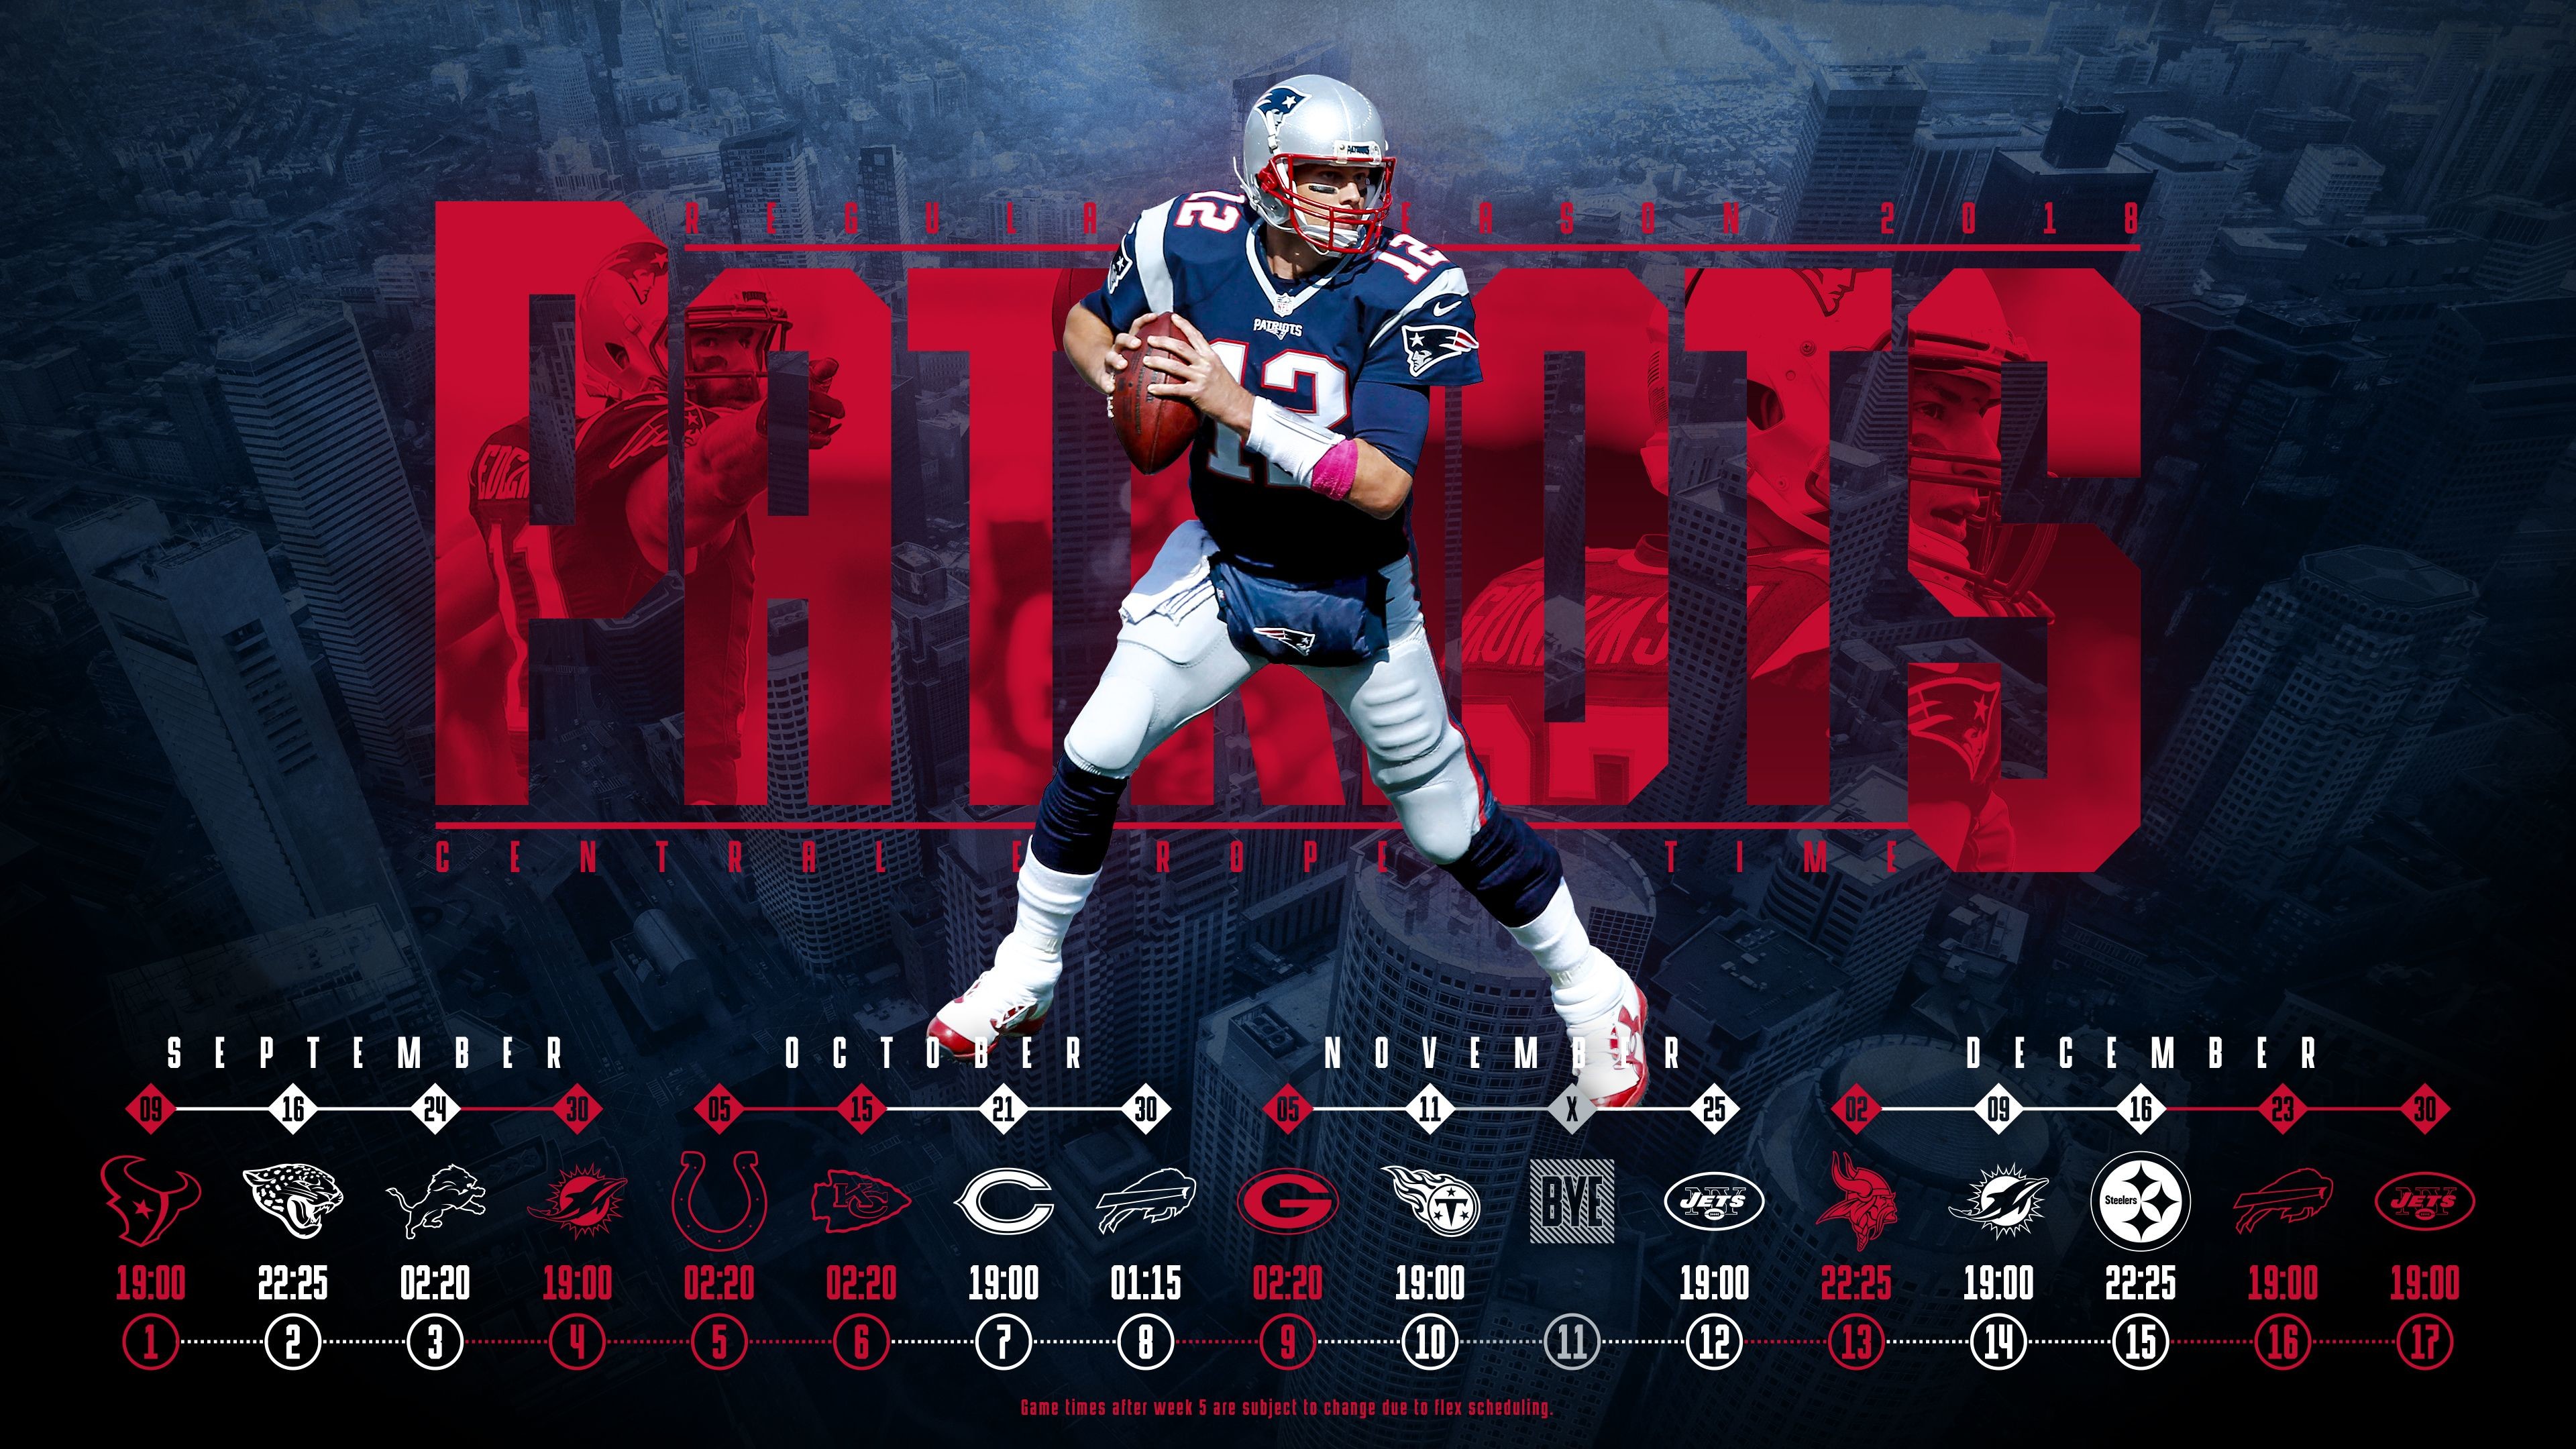 3840x2160 Schedule wallpaper for the New England Patriots Regular Season, 2018  Central European Time. Made by Tobler GergÅ #tgersdiy